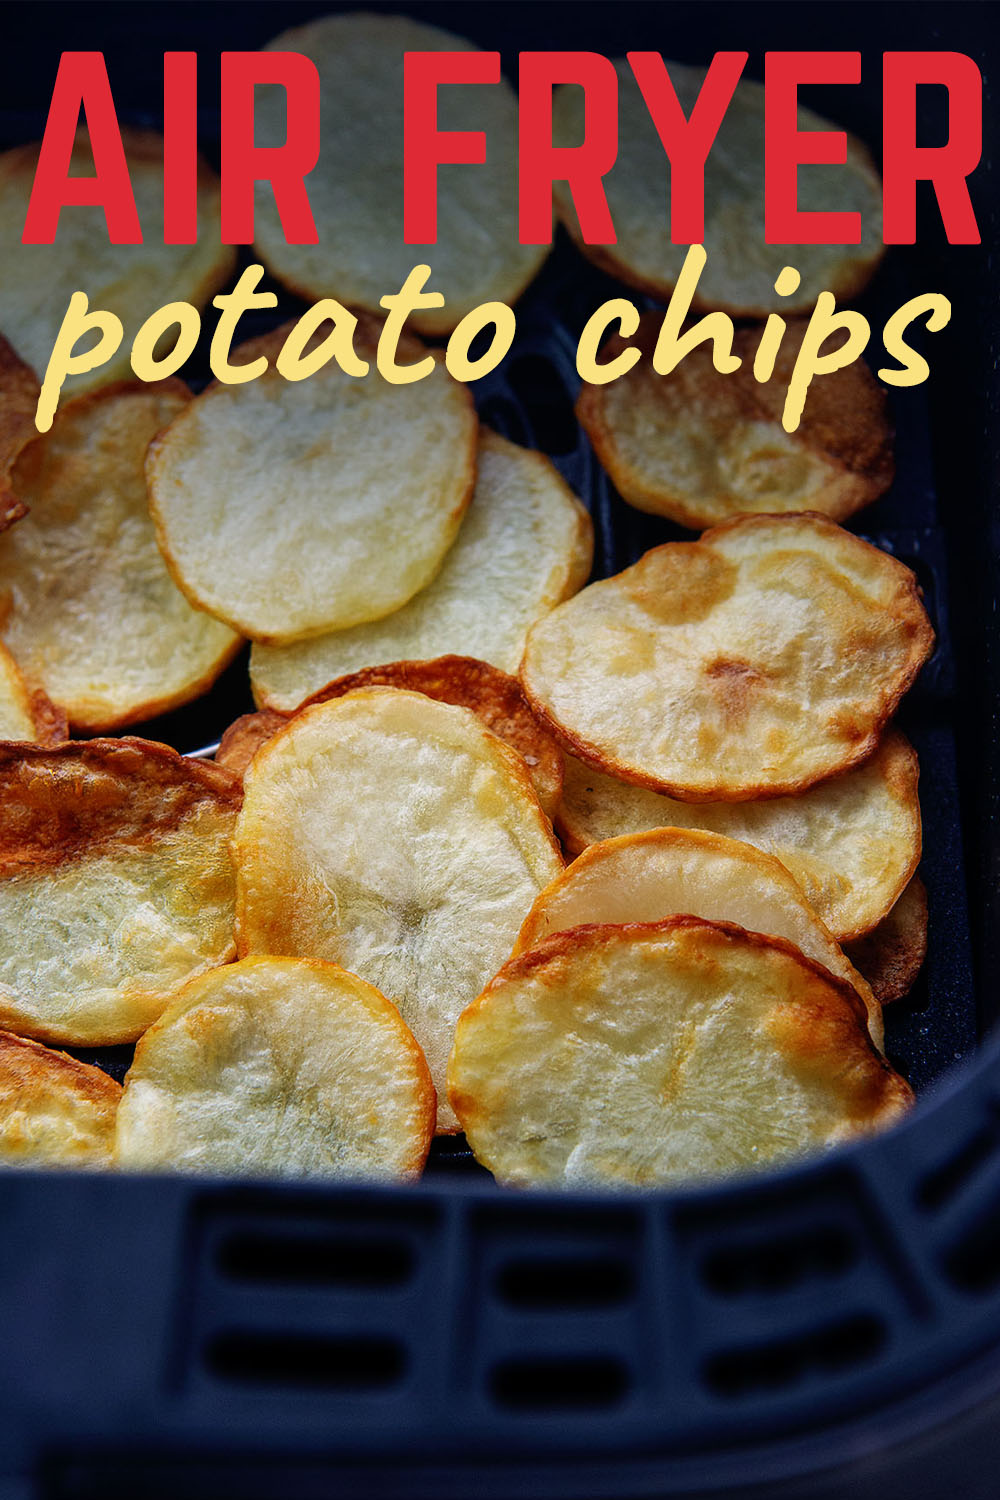 It's so easy to make homemade potato chips in the air fryer! They turn out perfectly crispy in no time!